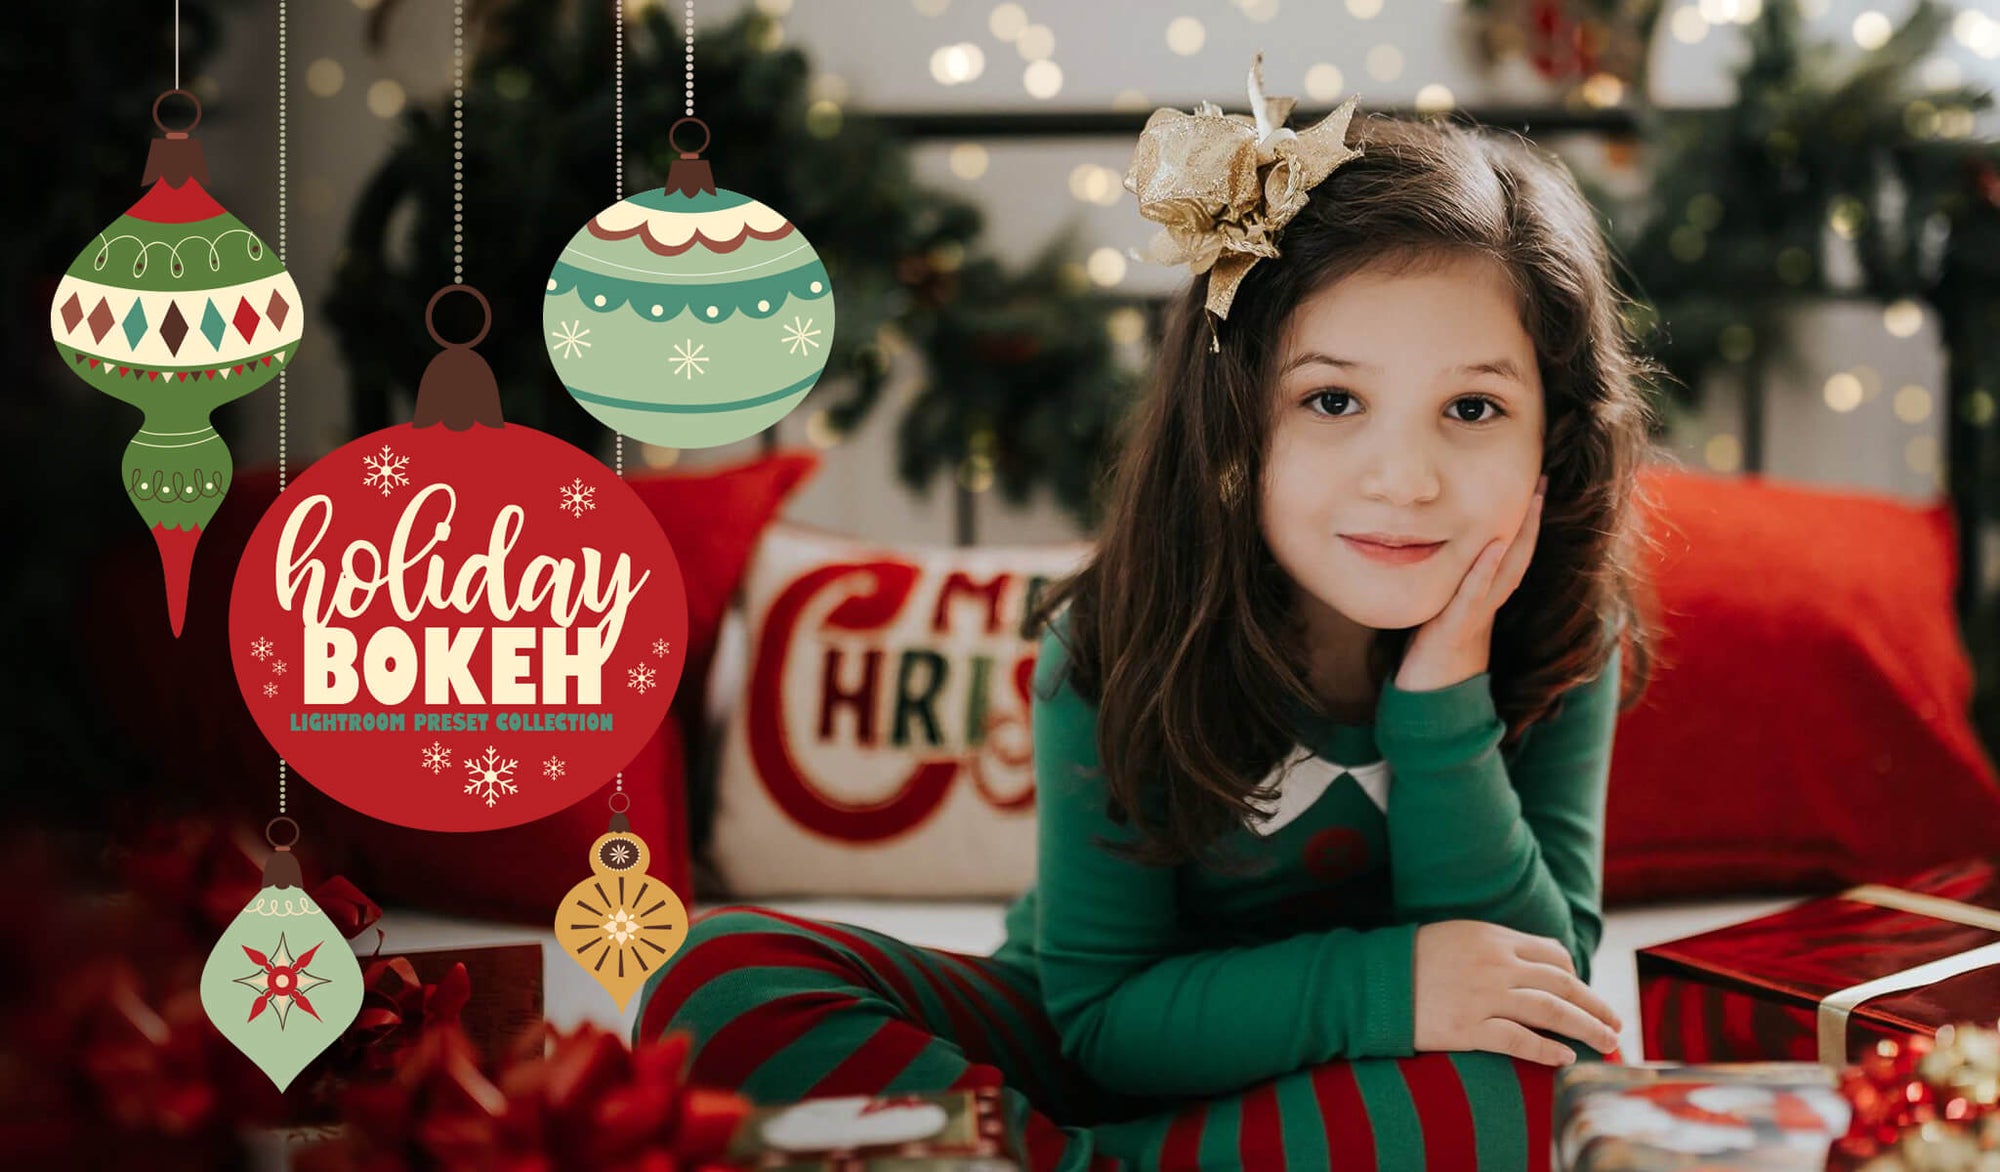 Holiday Bokeh Lightroom Presets - Limited Edition Collection - Pretty Lightroom Presets